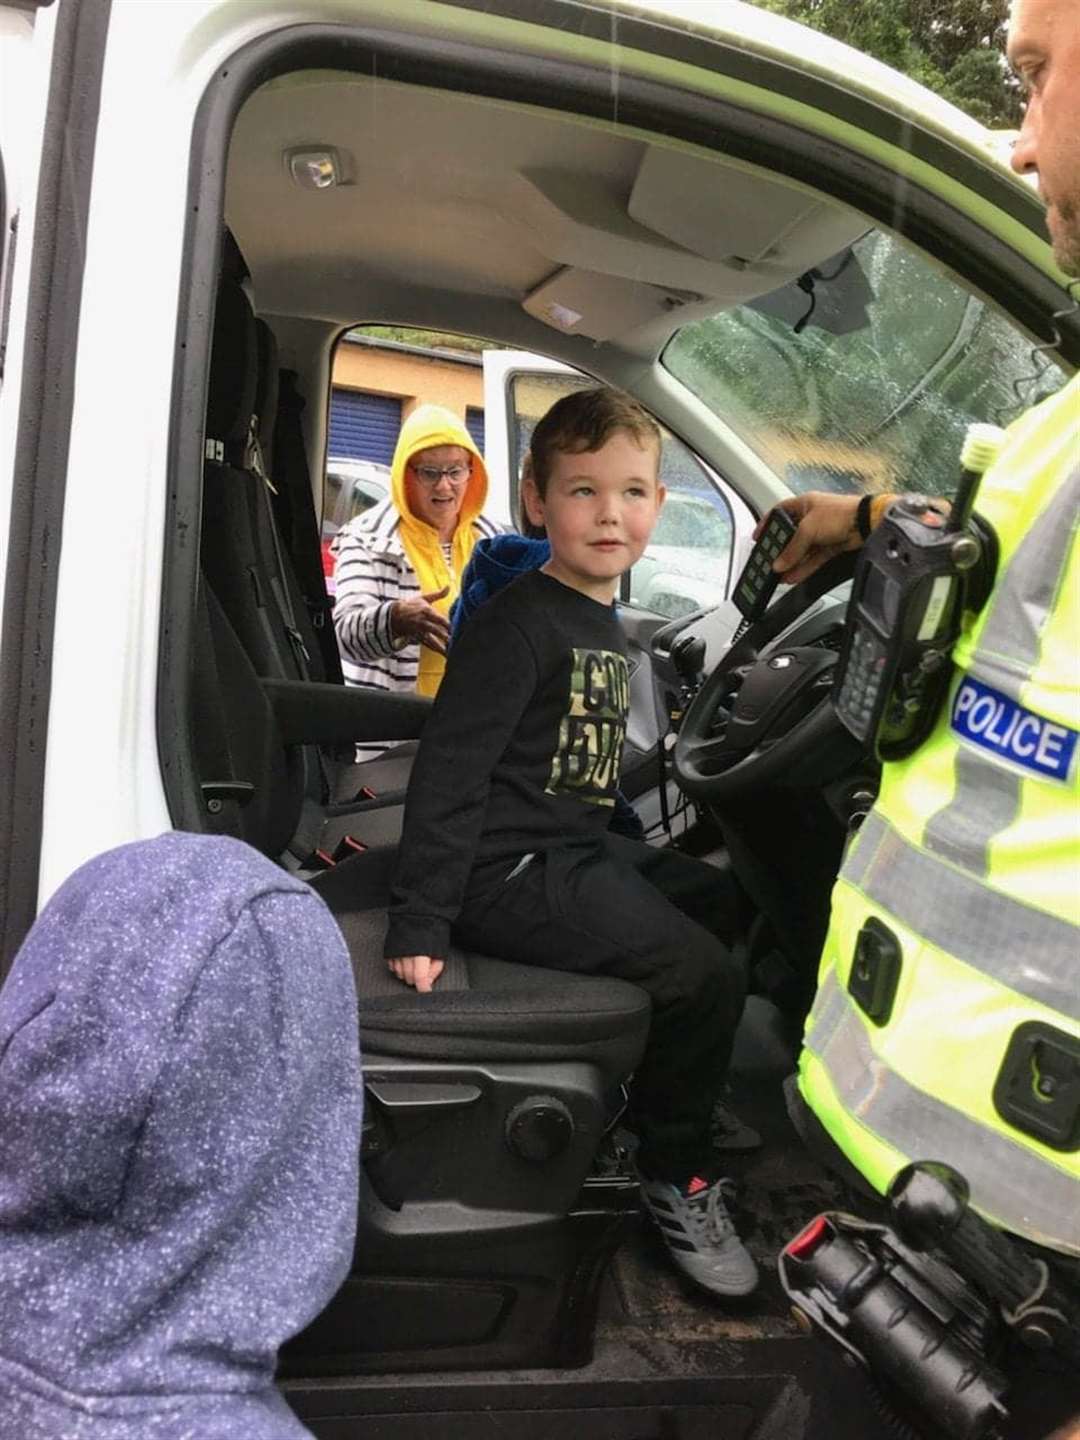 Sitting up front and setting off the siren is Aiden Dey (7)